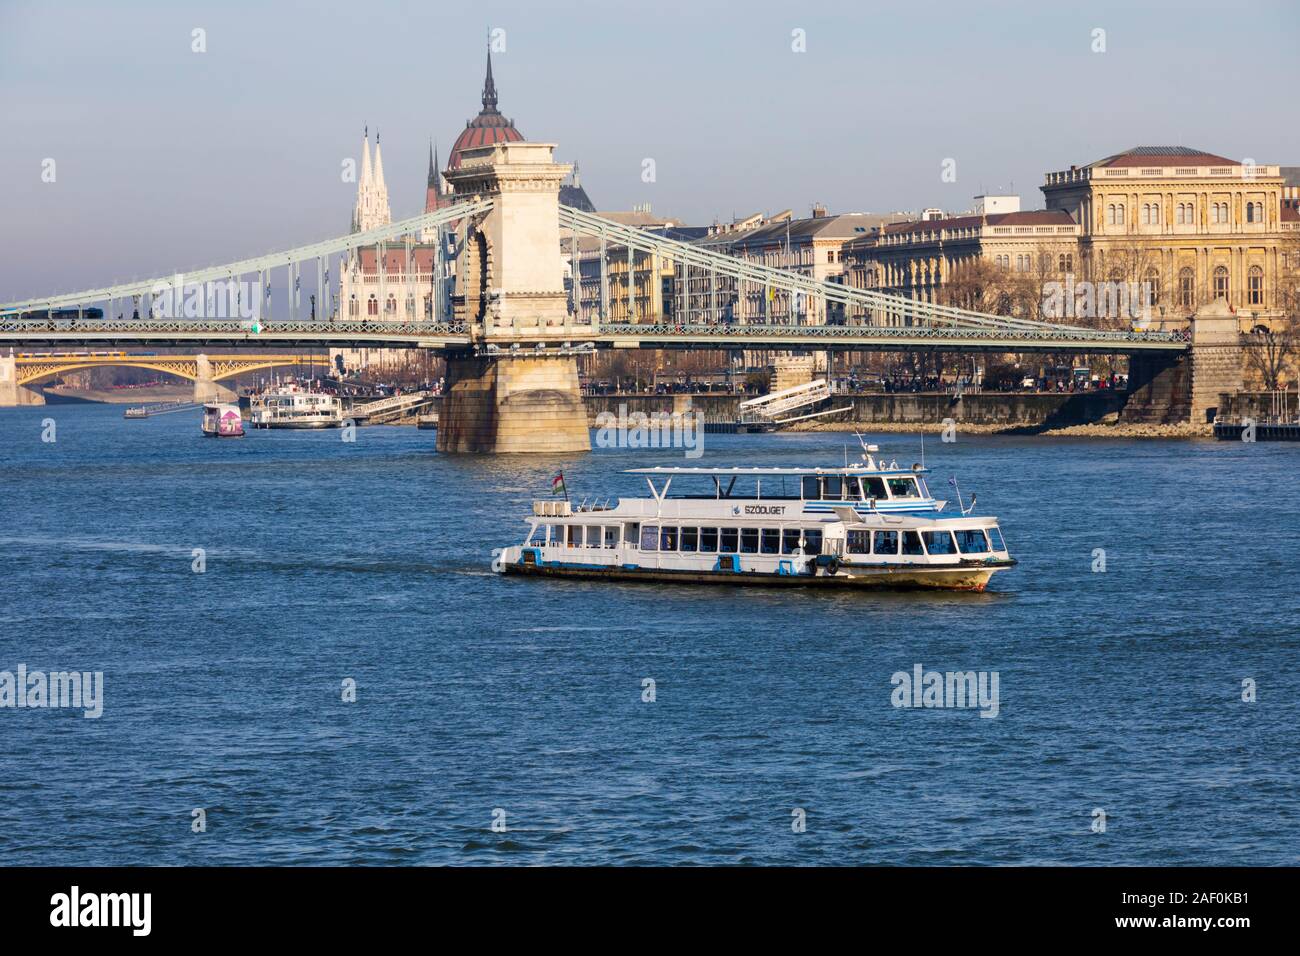 River Danube cruise ship passes under the Chain Bridge with the Parliament building behind. Budapest, Hungary. December 2019 Stock Photo